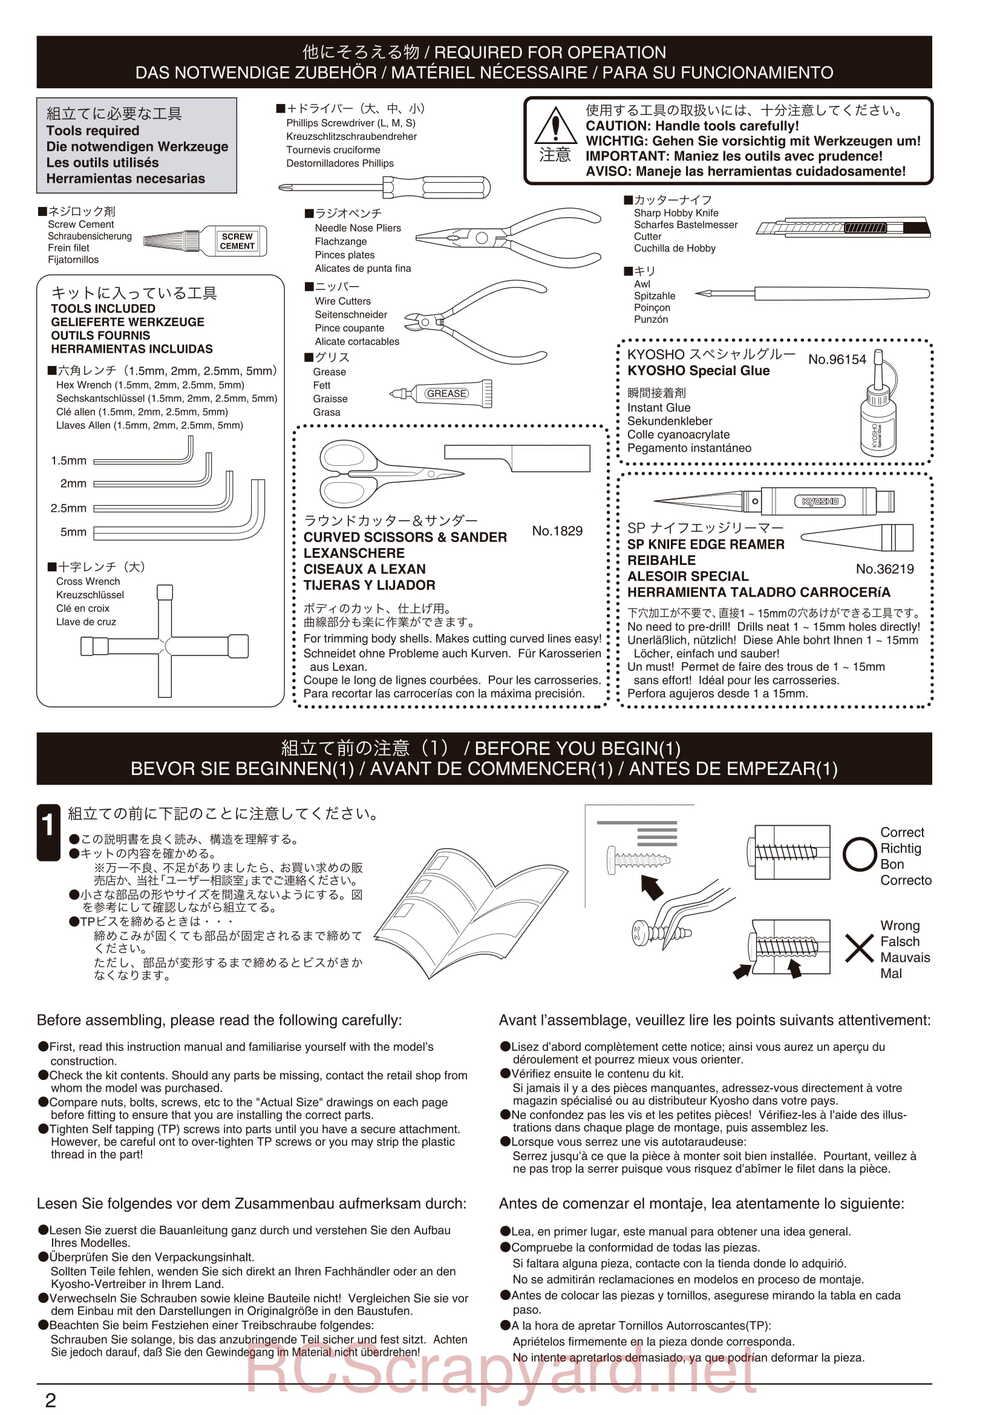 Kyosho - 31097 - DST - Manual - Page 02